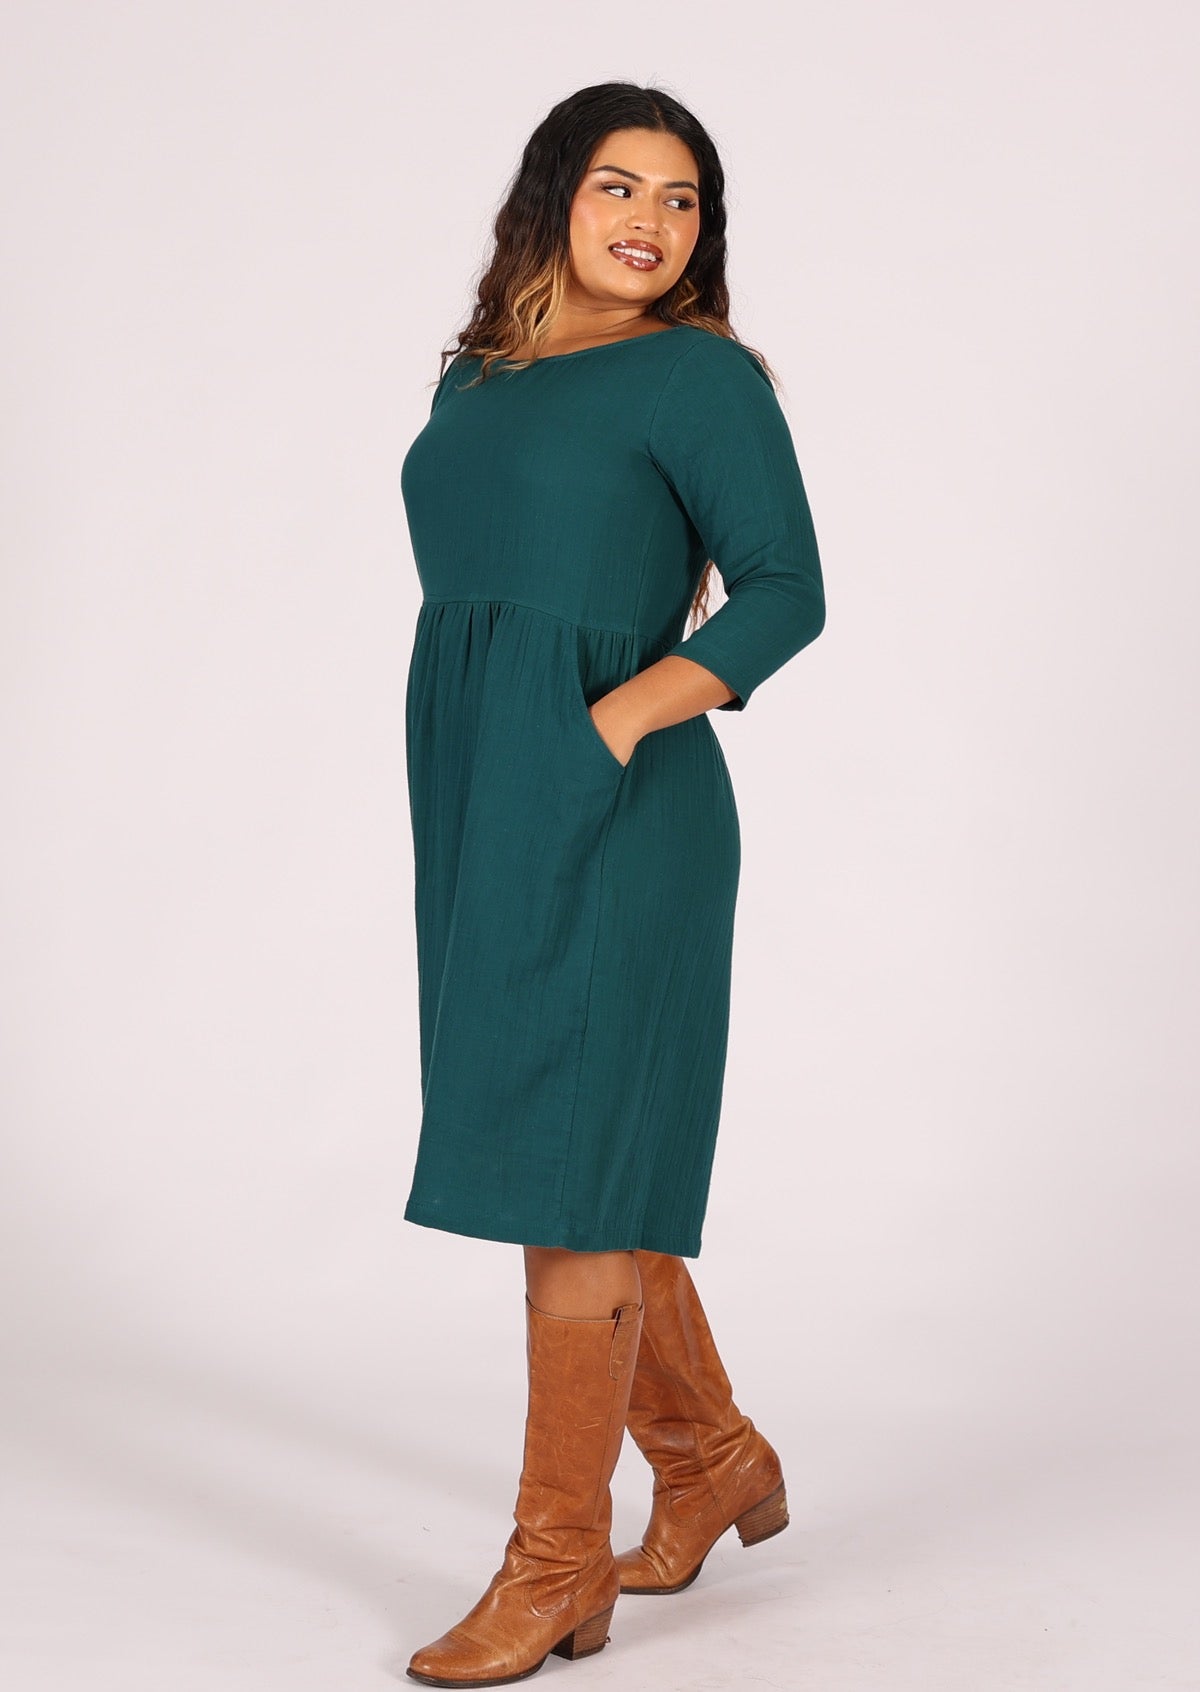 Lightweight cotton dress in deep teal looks great belted too